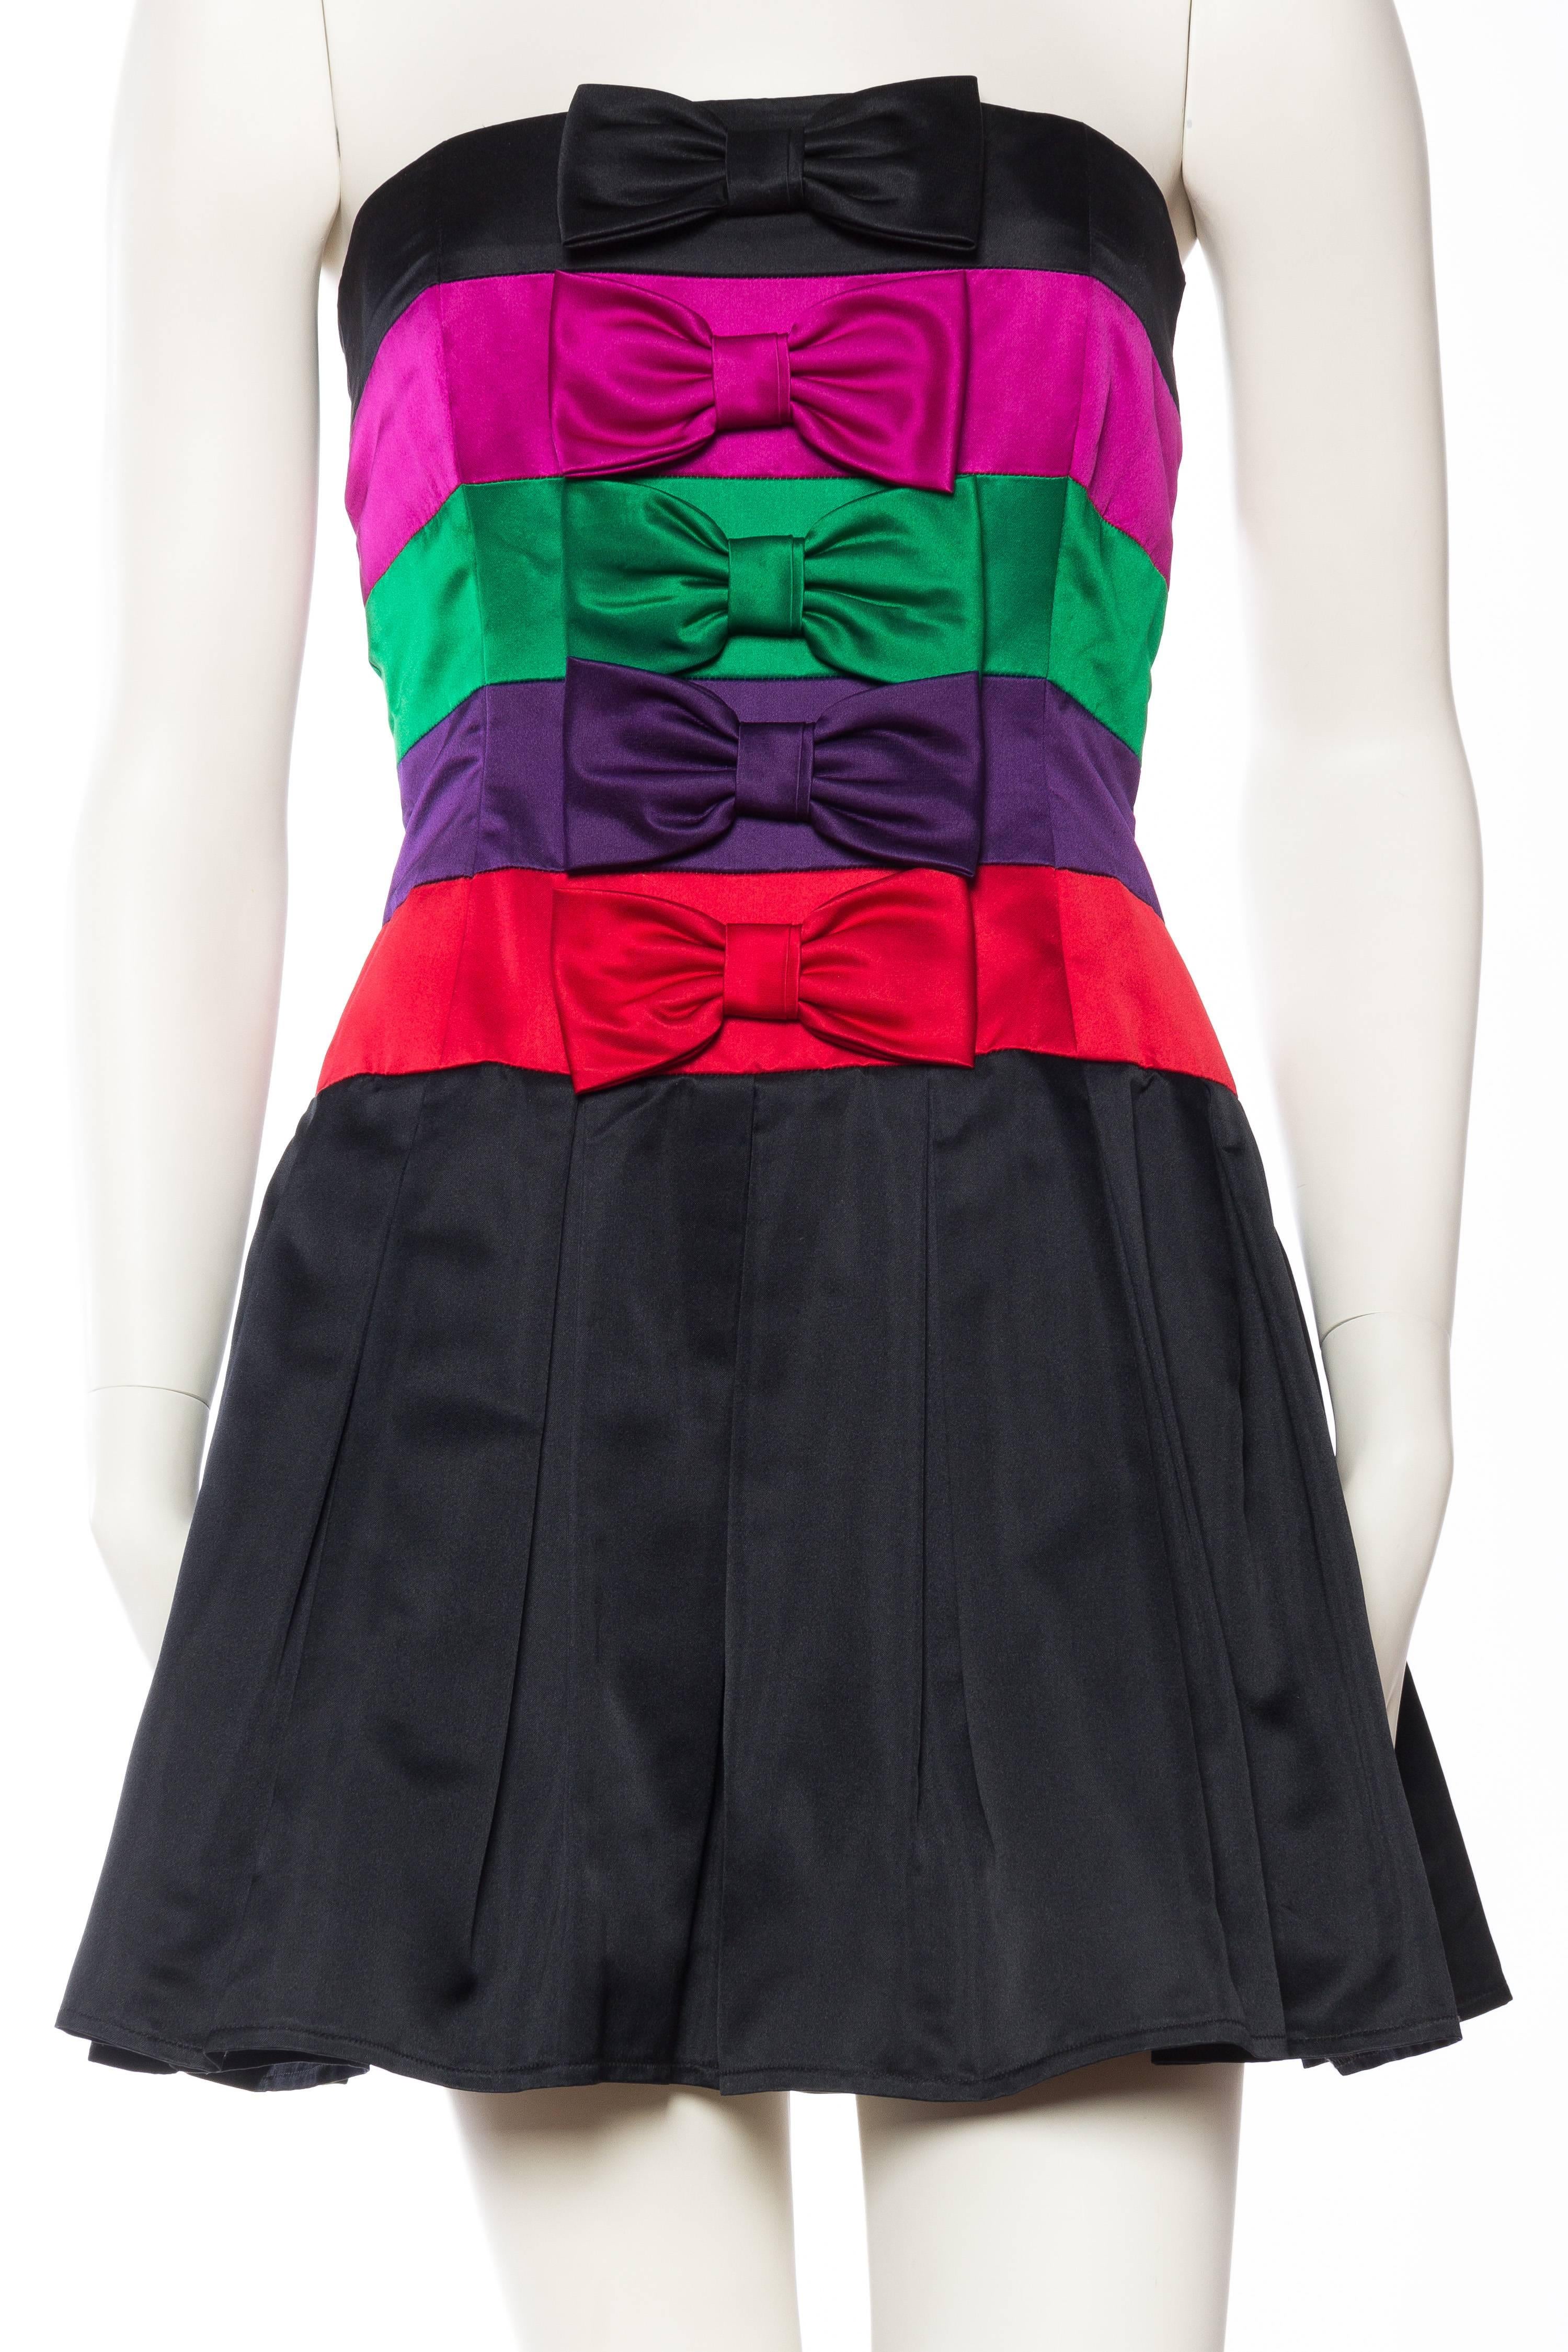 Bands of luscious duchess silk in rich jewel tones adorned with large satin bows is the principle design element to this fun little dress by French designer Albert Nipon. Fully lined in silk with a boned bodice. 